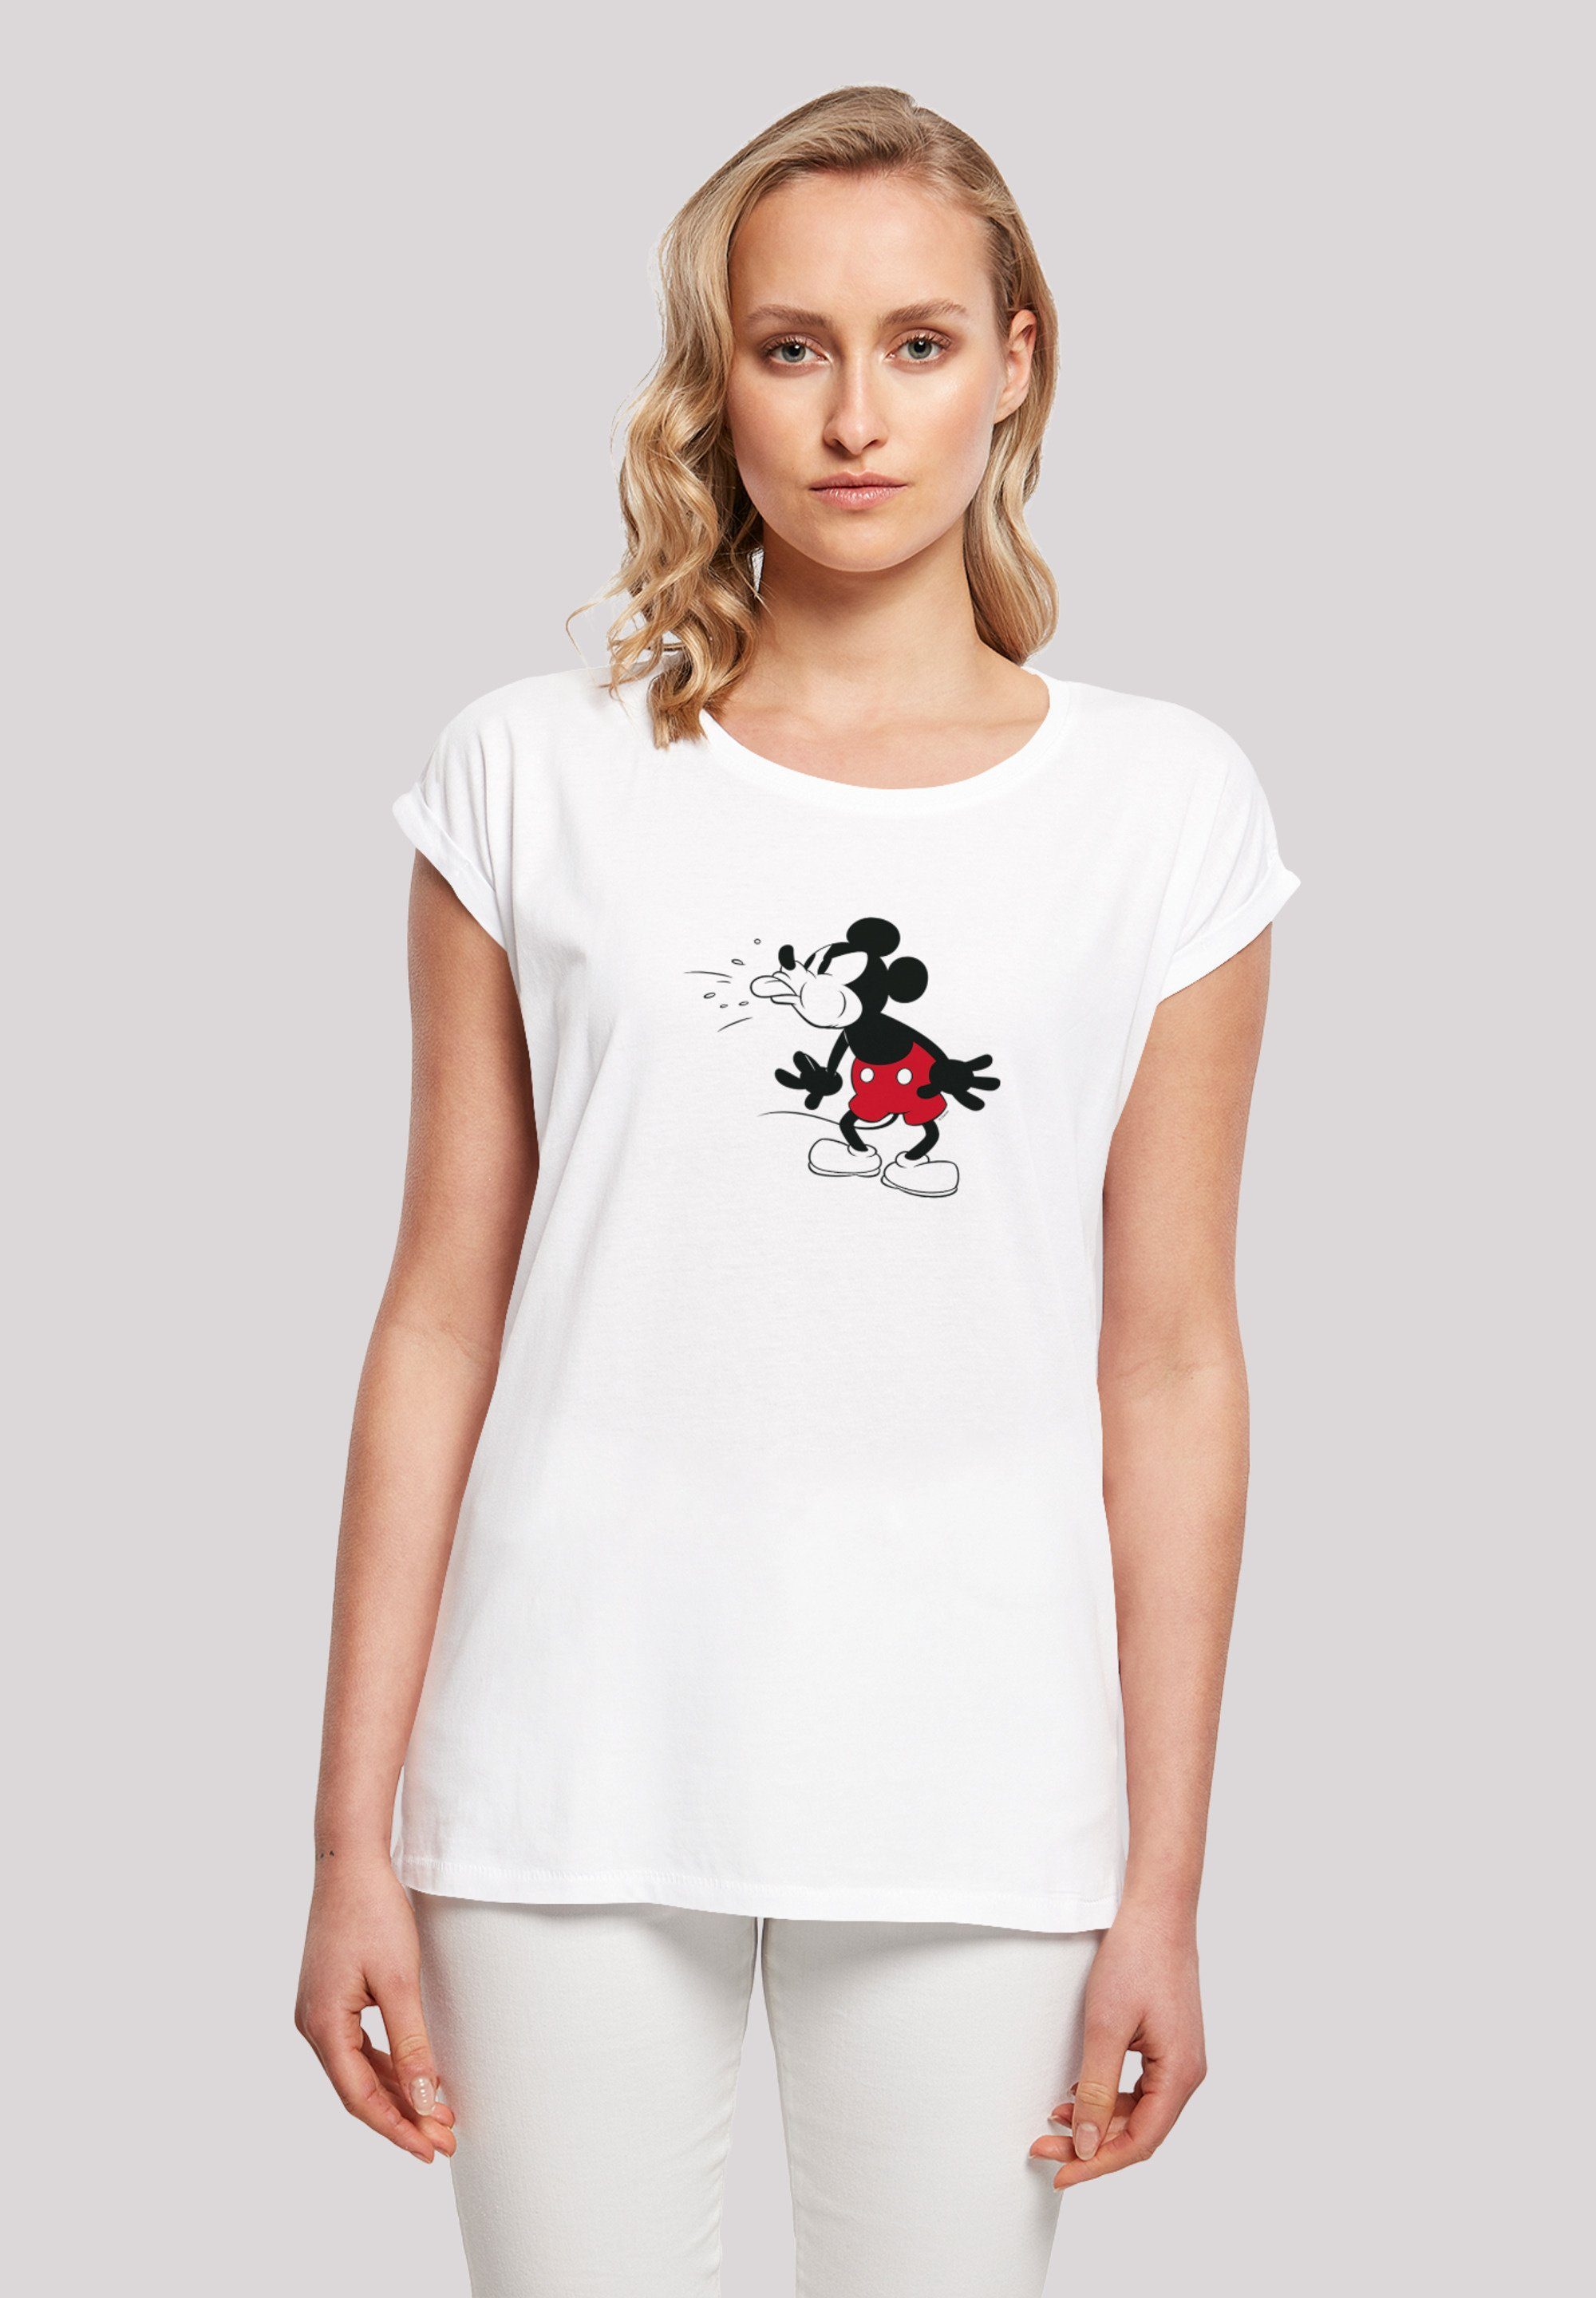 F4NT4STIC T-Shirt Disney Micky Maus Vintage Mouse Classic Mickey Print